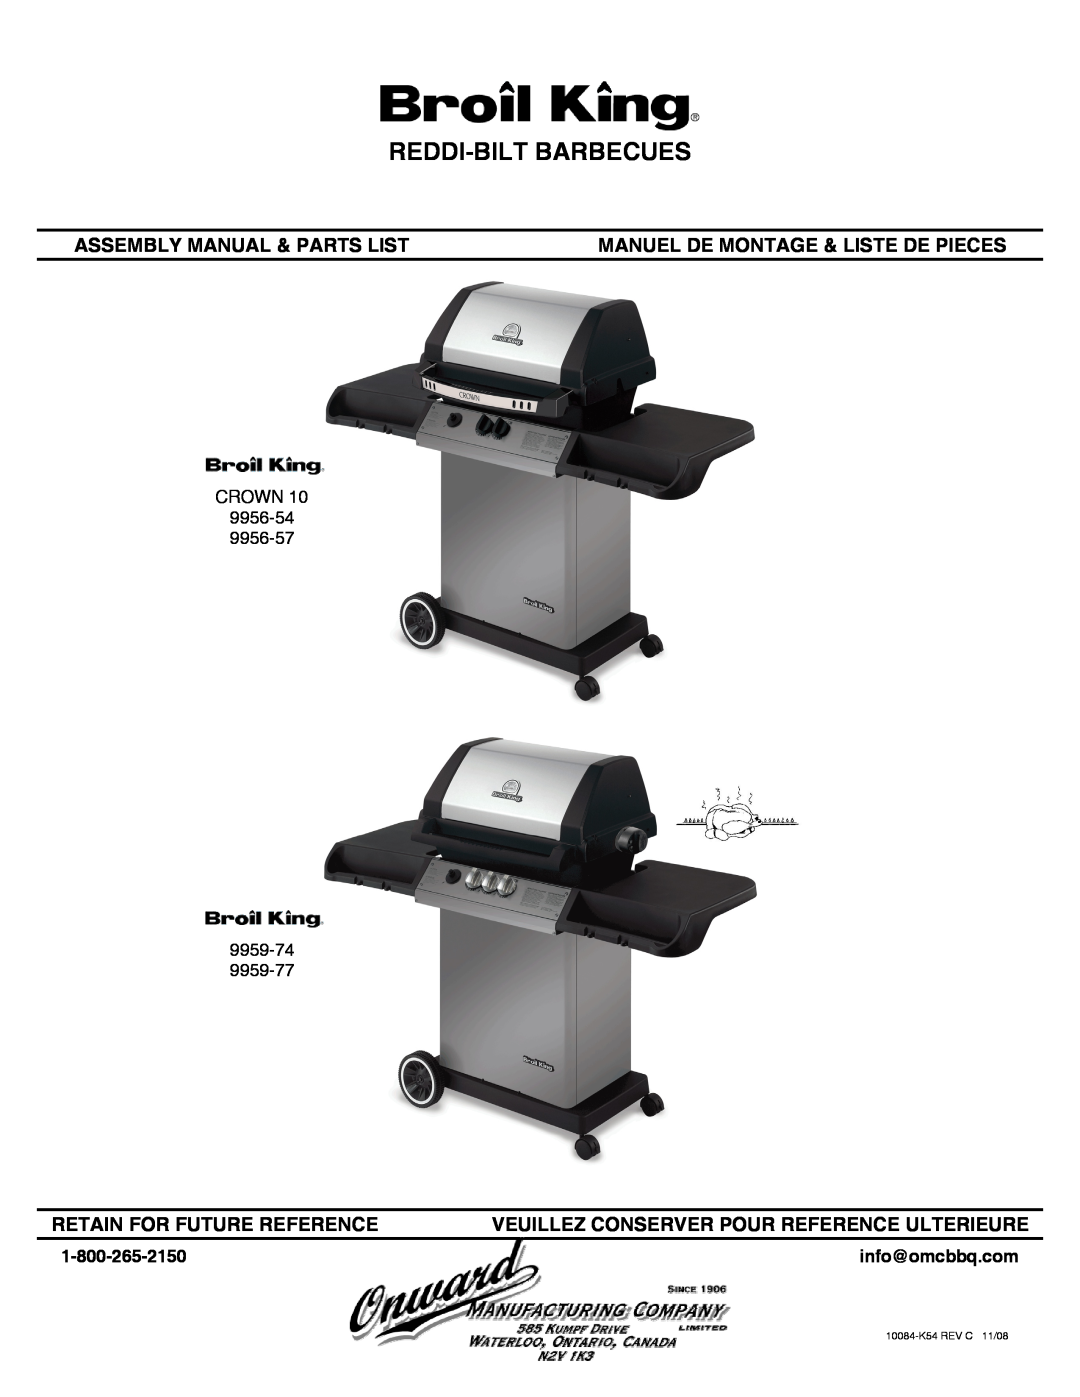 Broil King 9956-57 manual info@omcbbq.com, Reddi-Bilt Barbecues, Assembly Manual & Parts List, Retain For Future Reference 